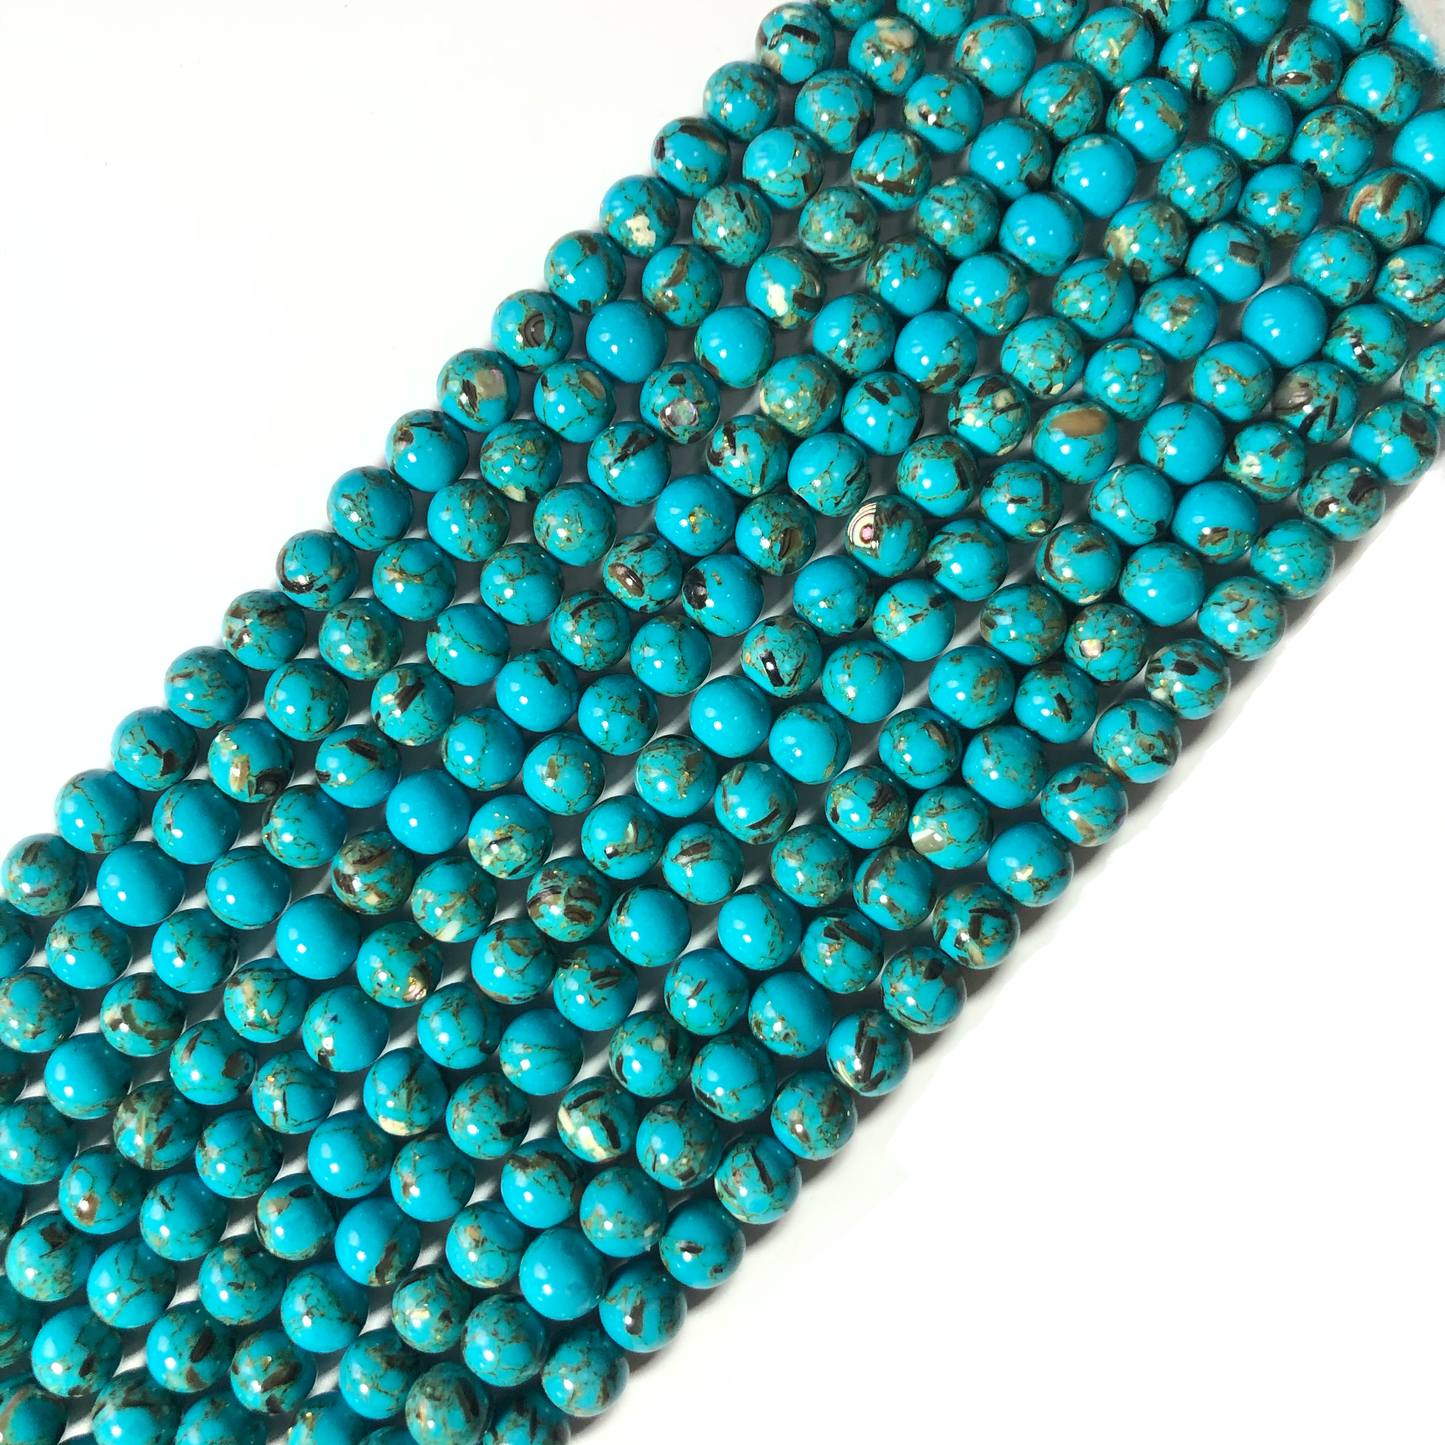 2 Strands/lot 8mm, 10mm Blue Shell Turquoise Round Stone Beads Stone Beads 8mm Stone Beads Turquoise Beads Charms Beads Beyond